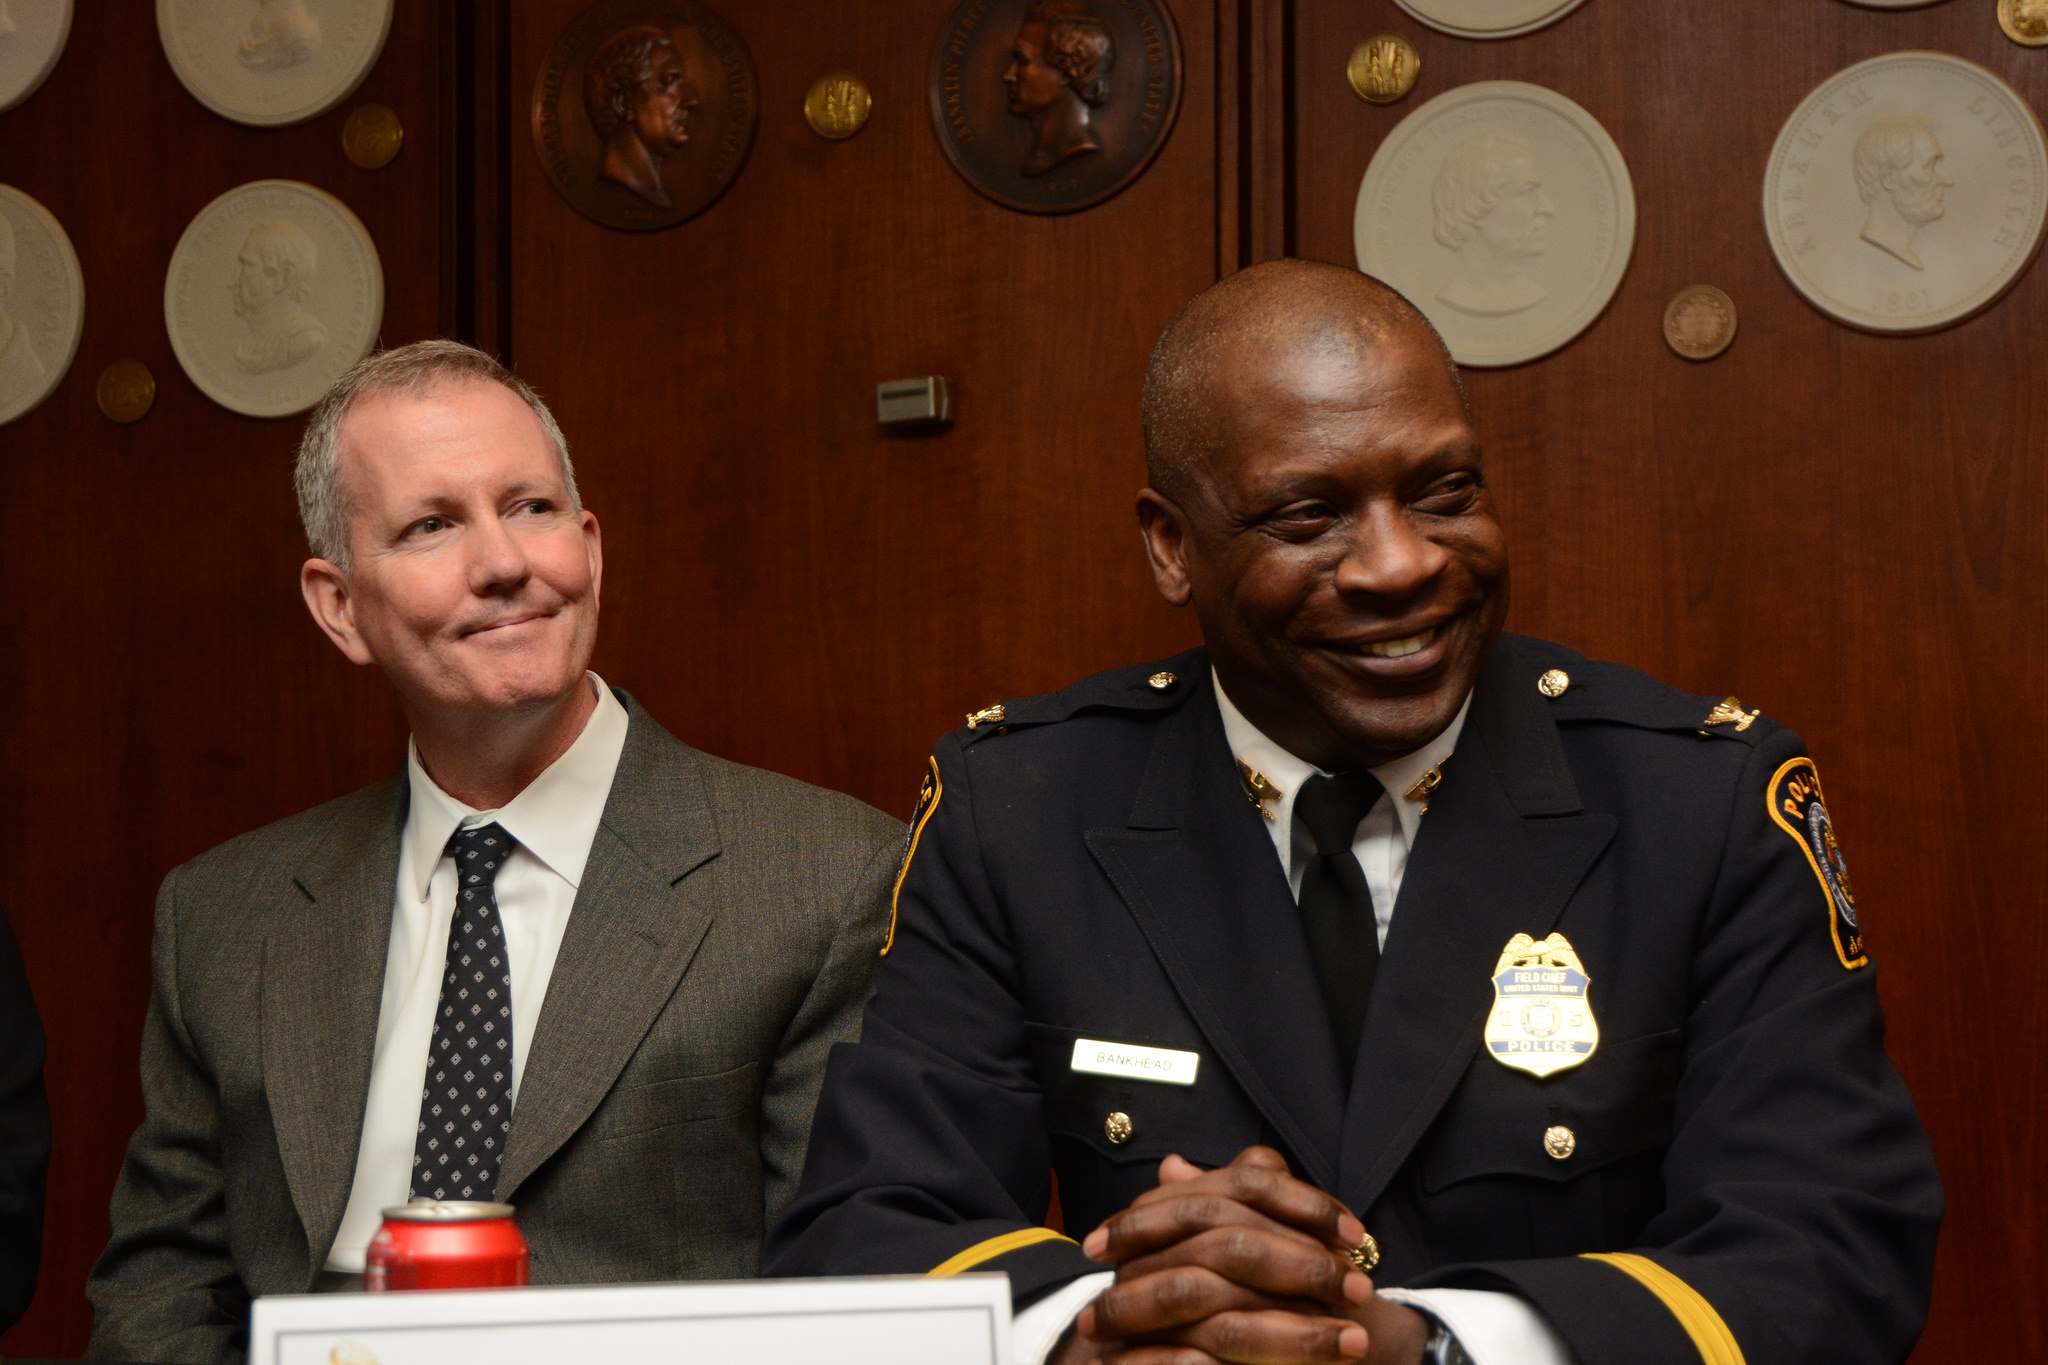 Public Affairs Manager (Philadelphia facility) Tim Grant and U.S. Mint Police Field Chief Robert L. Bankhead participate in a roundtable discussion on February 22, 2018, at the U.S. Mint facility in Philadelphia. U.S. Mint photo by Jill Westeyn.